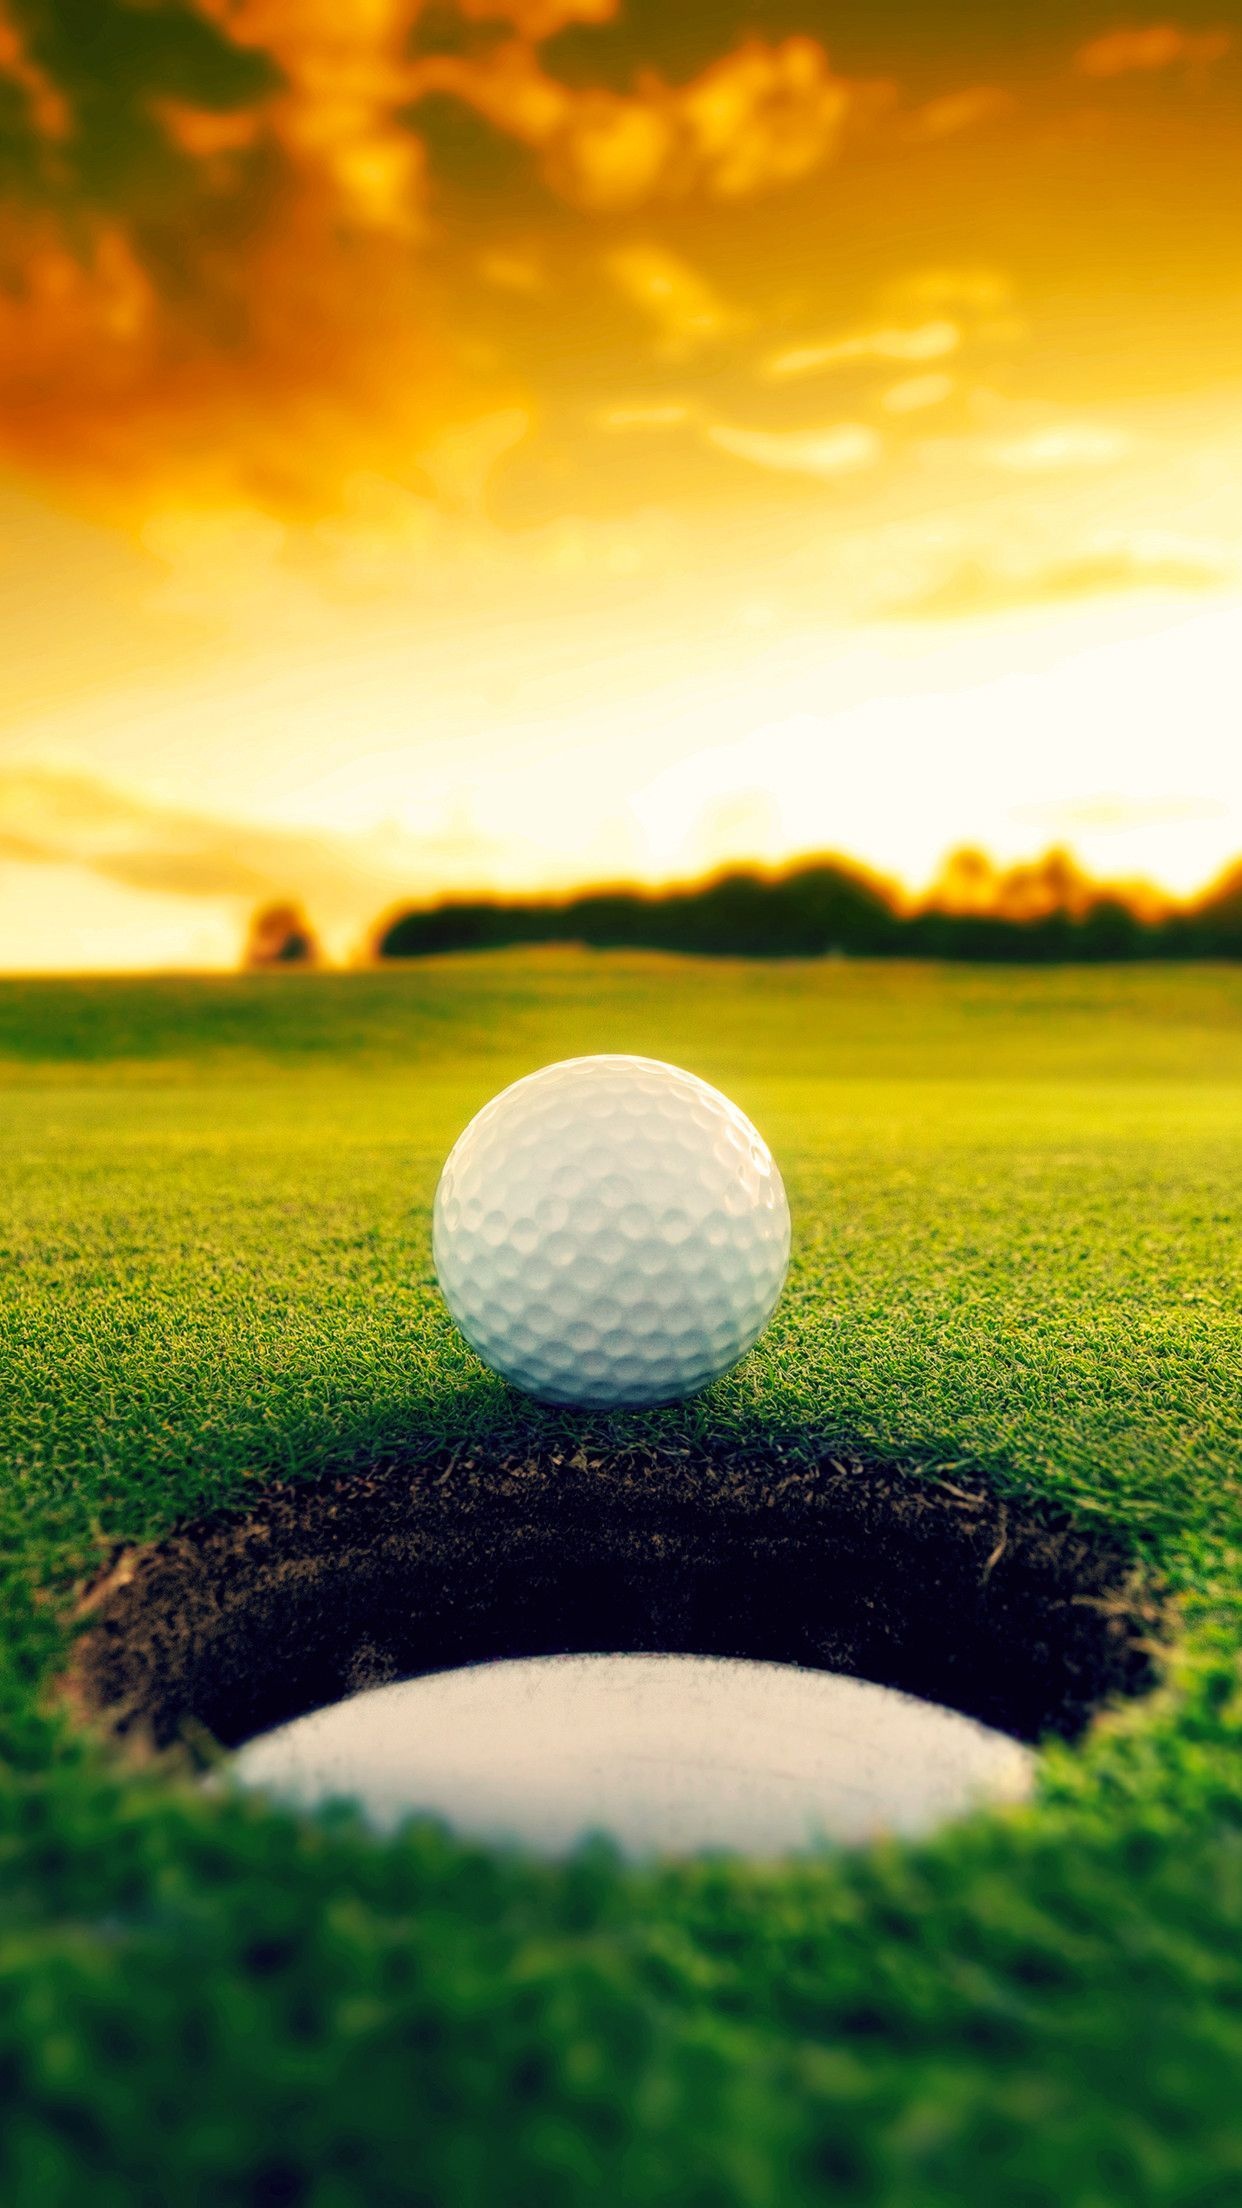 Golf phone wallpapers, Serene landscapes, Golf course scenery, Relaxing sport, 1250x2210 HD Phone